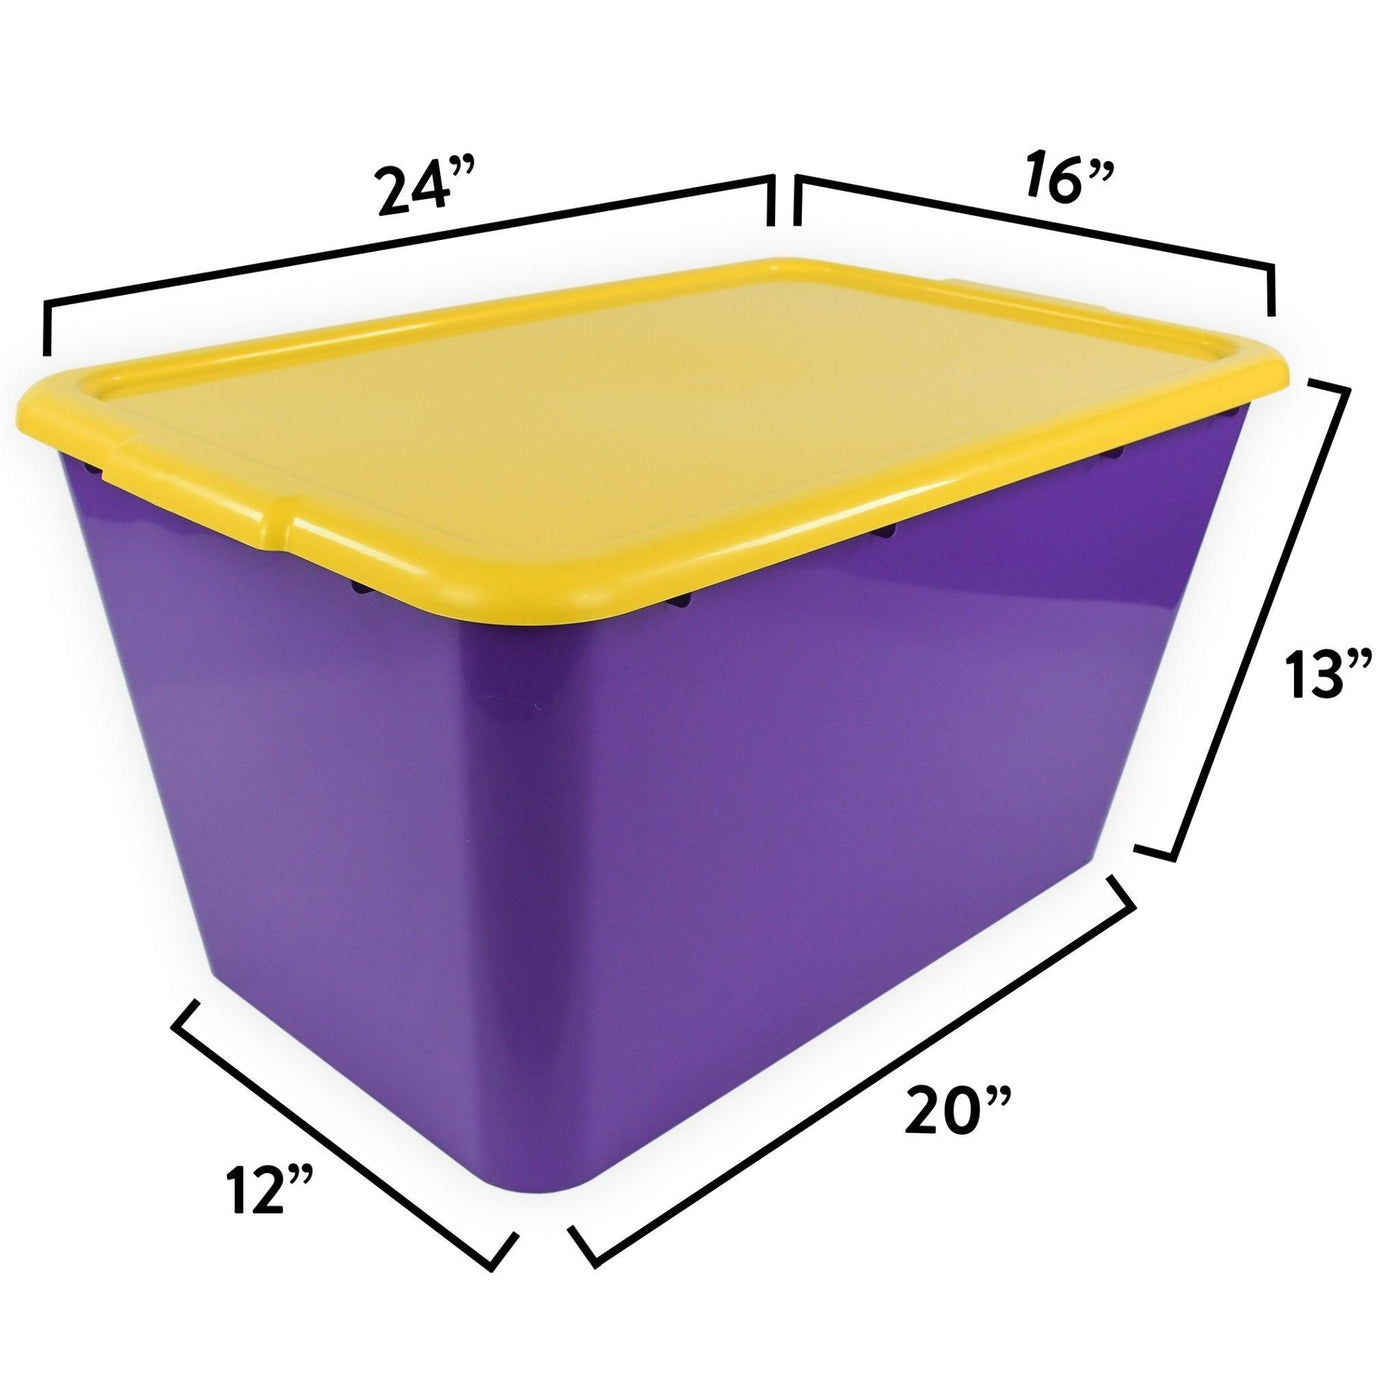 SimplyKleen 14.5-gal. (58-qt.) Fan-Tastic Plastic Storage Containers, 6 Team Color Options,(Pack of 2/4)